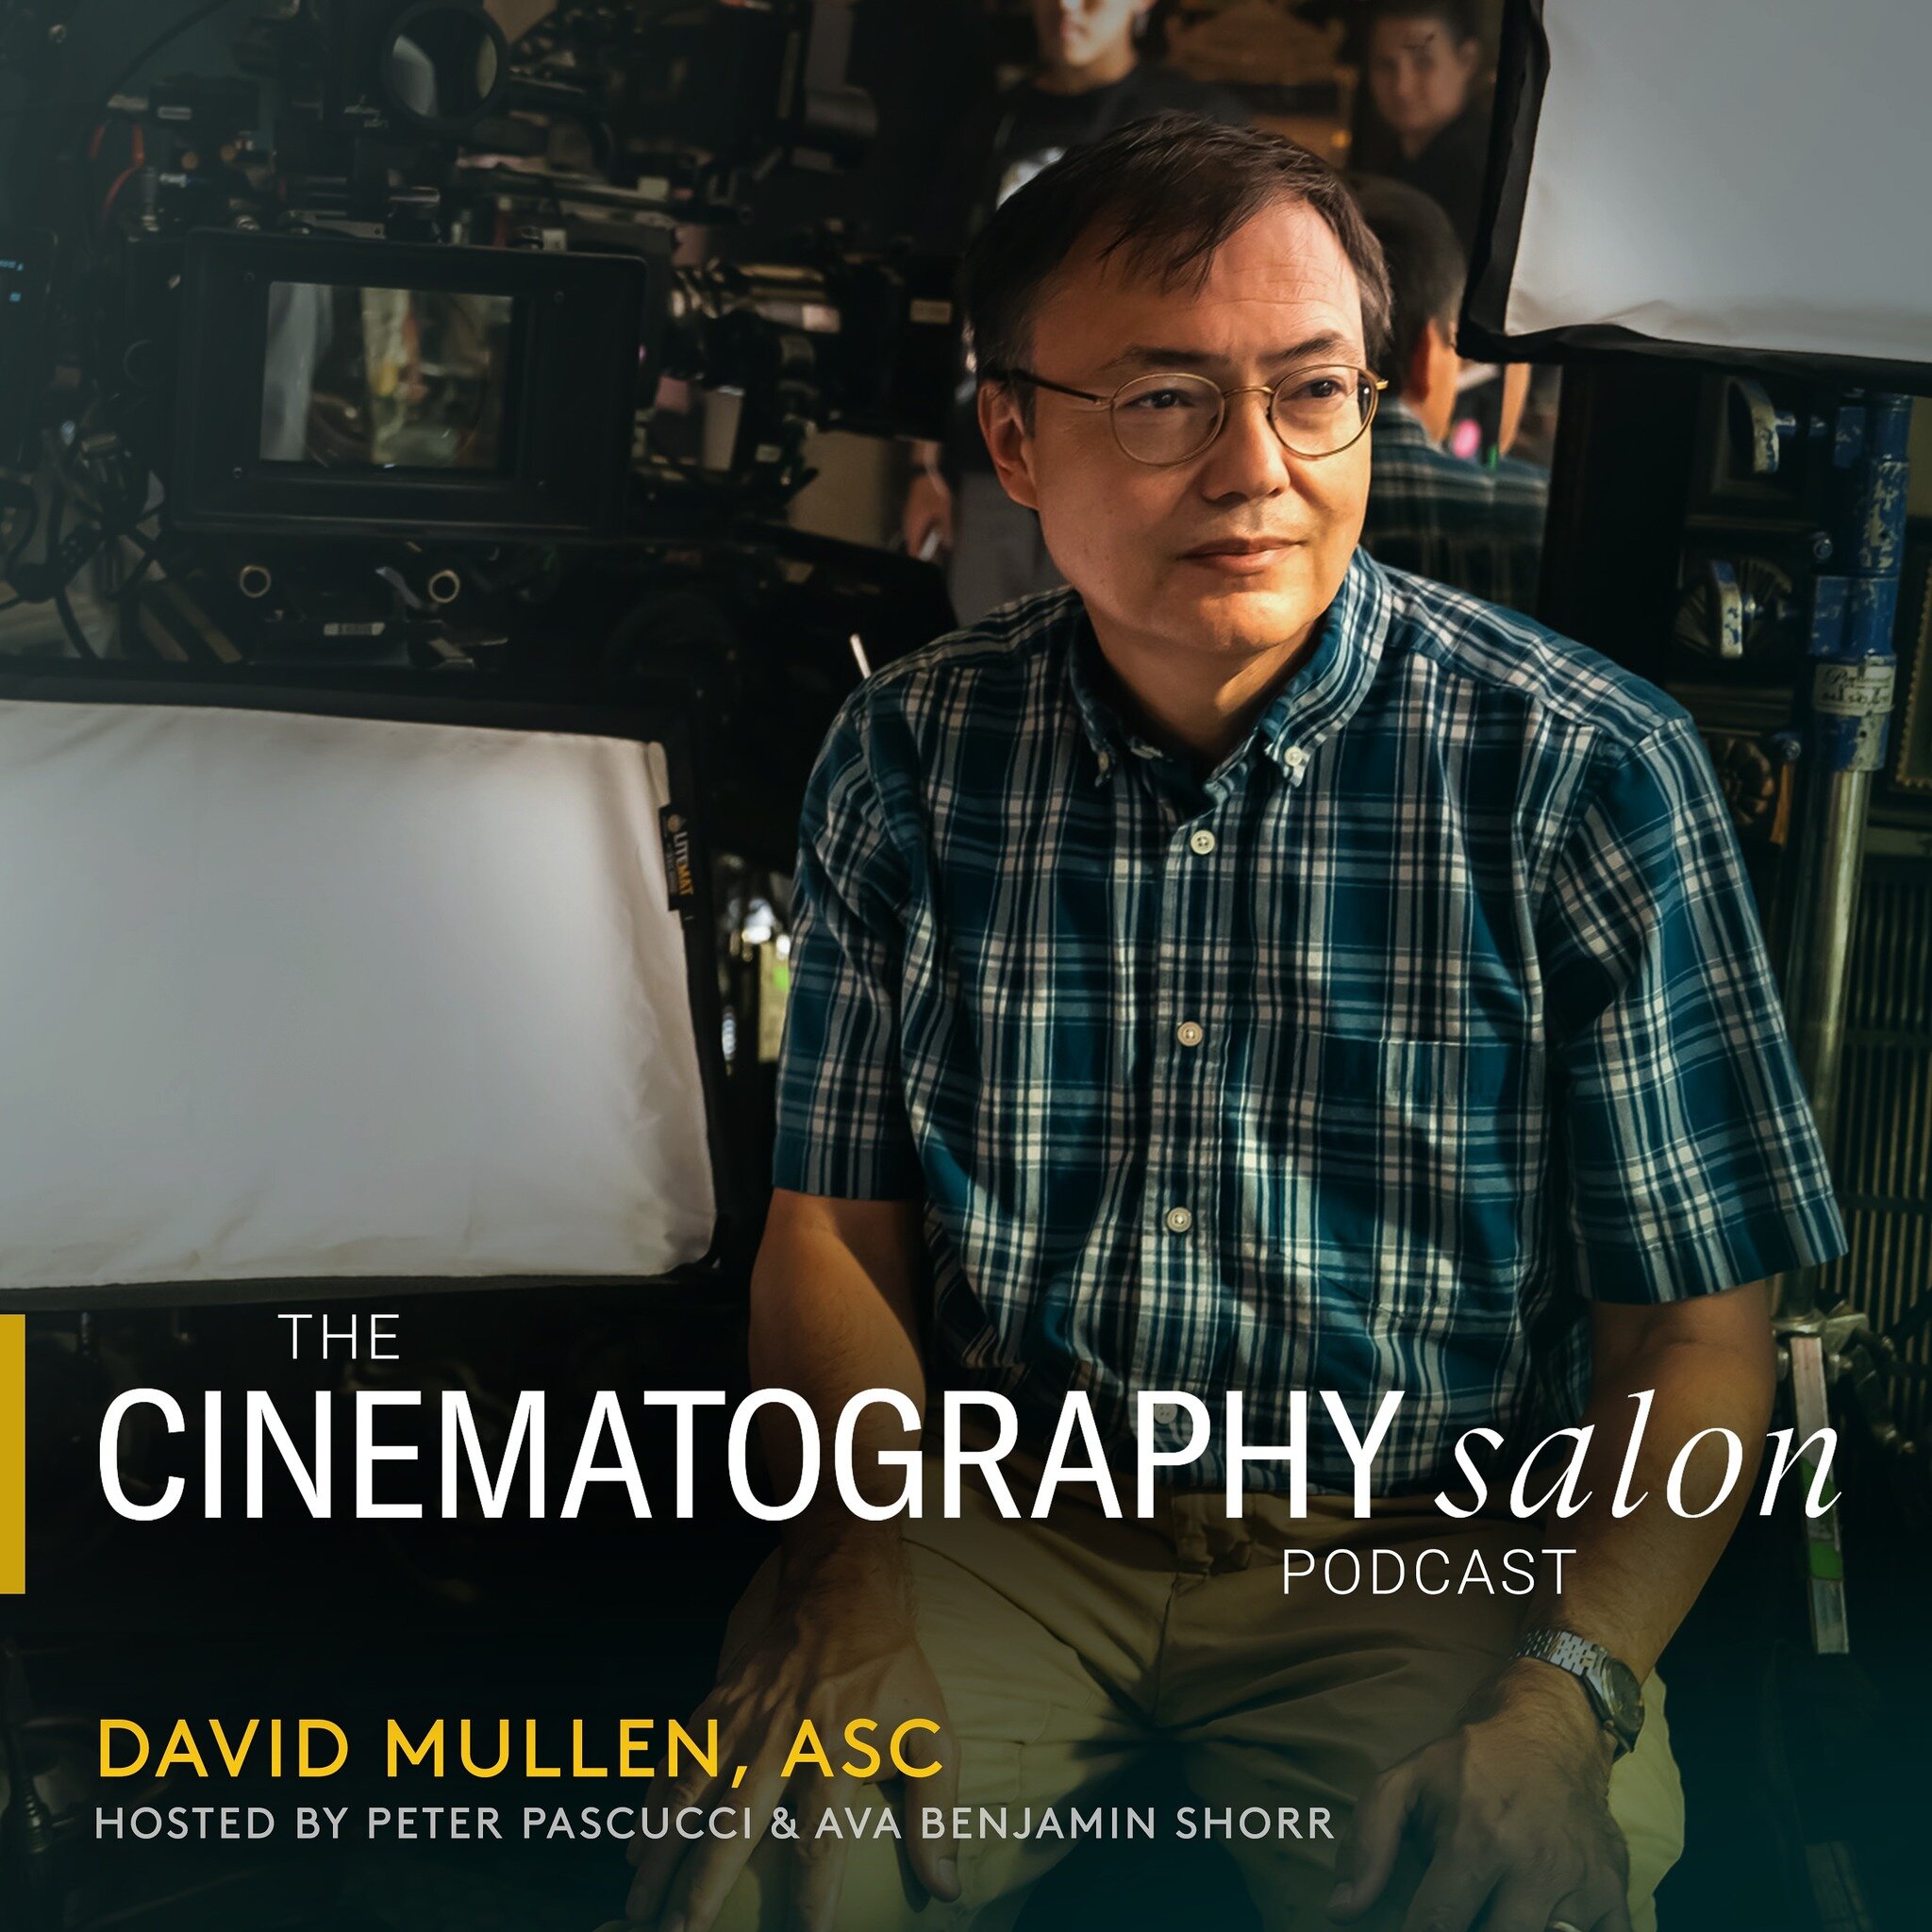 🎥🎥🎥LINK IN BIO🎥🎥🎥

David Mullen, ASC: Using Film History to Empower Today&rsquo;s Cinematographers

This week we welcome David Mullen, ASC, Emmy winner for his exceptional work on &ldquo;The Marvelous Mrs. Maisel&rdquo;. Sharing his insights in